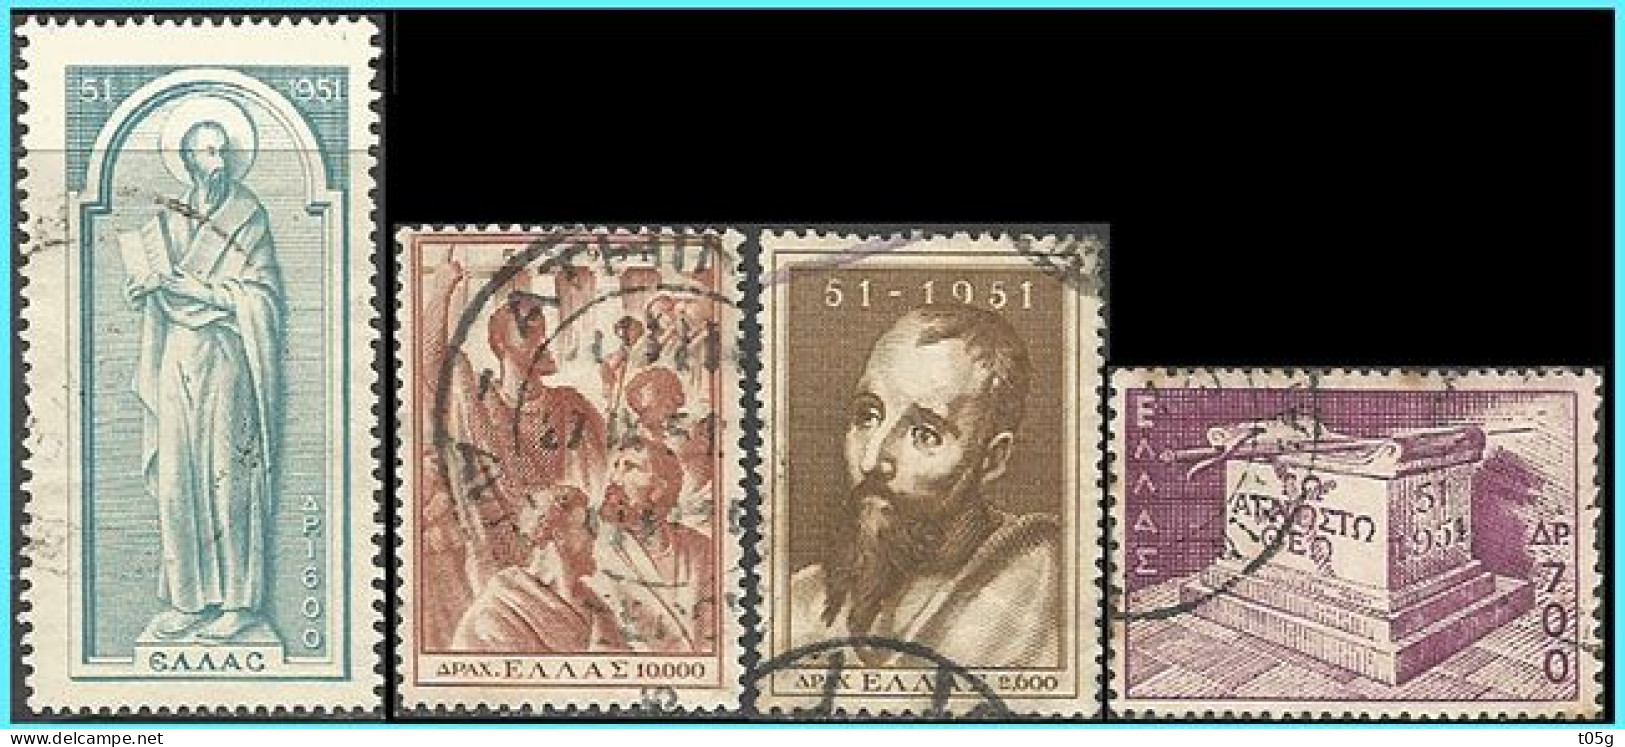 GREECE-GRECE- HELLAS 1951: St. Paul's Compl Set Used - Used Stamps